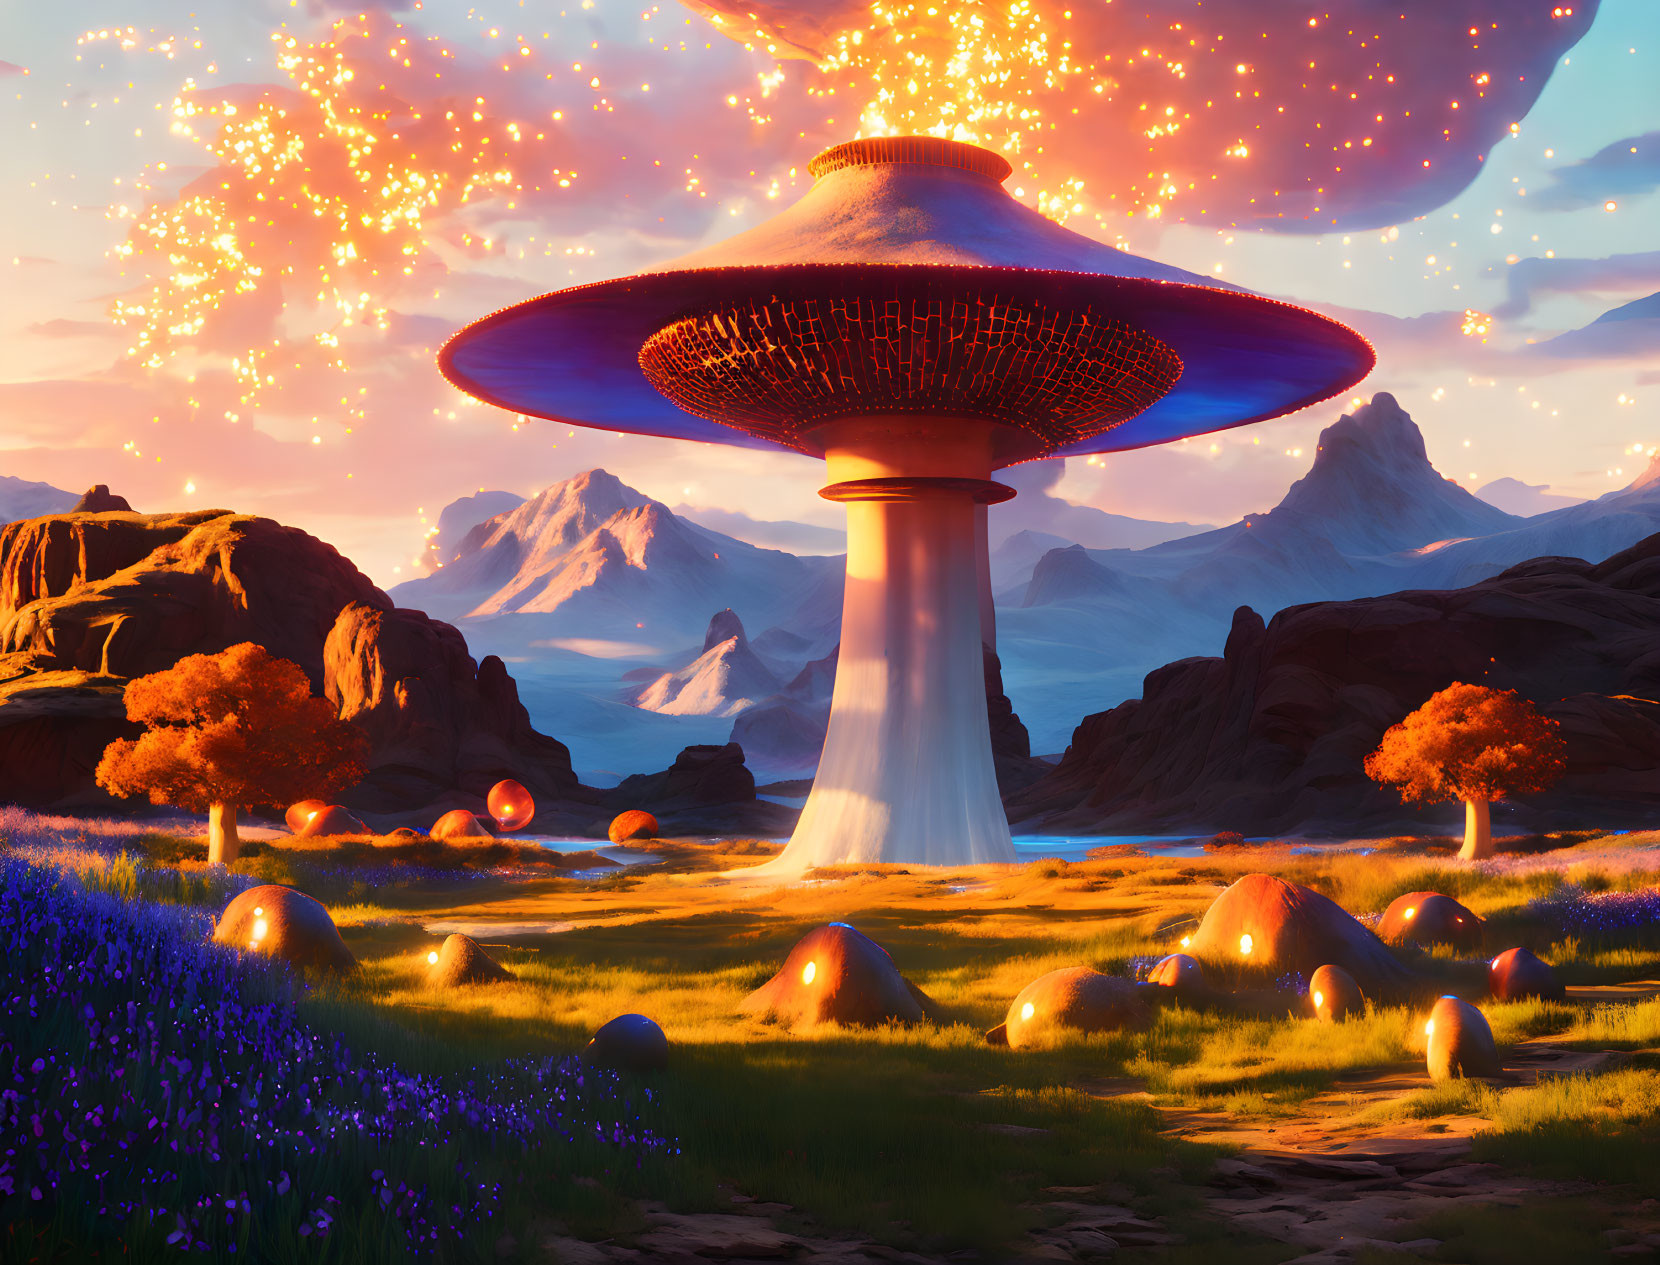 Fantasy landscape with giant blue glass mushrooms 